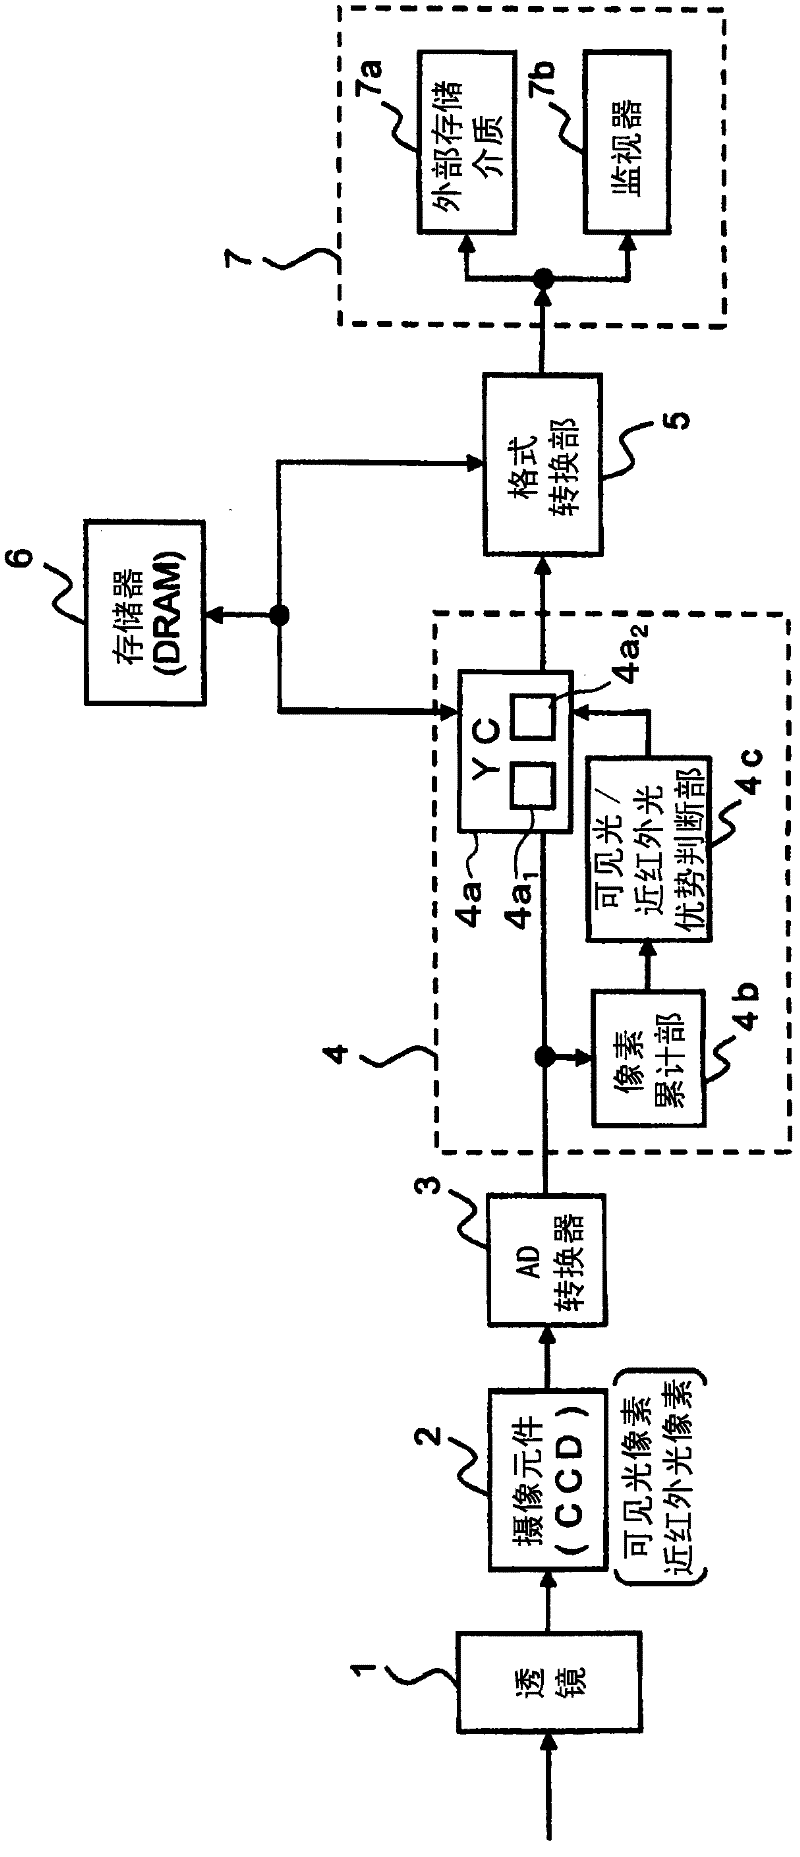 Imaging device and signal processing circuit for the imaging device